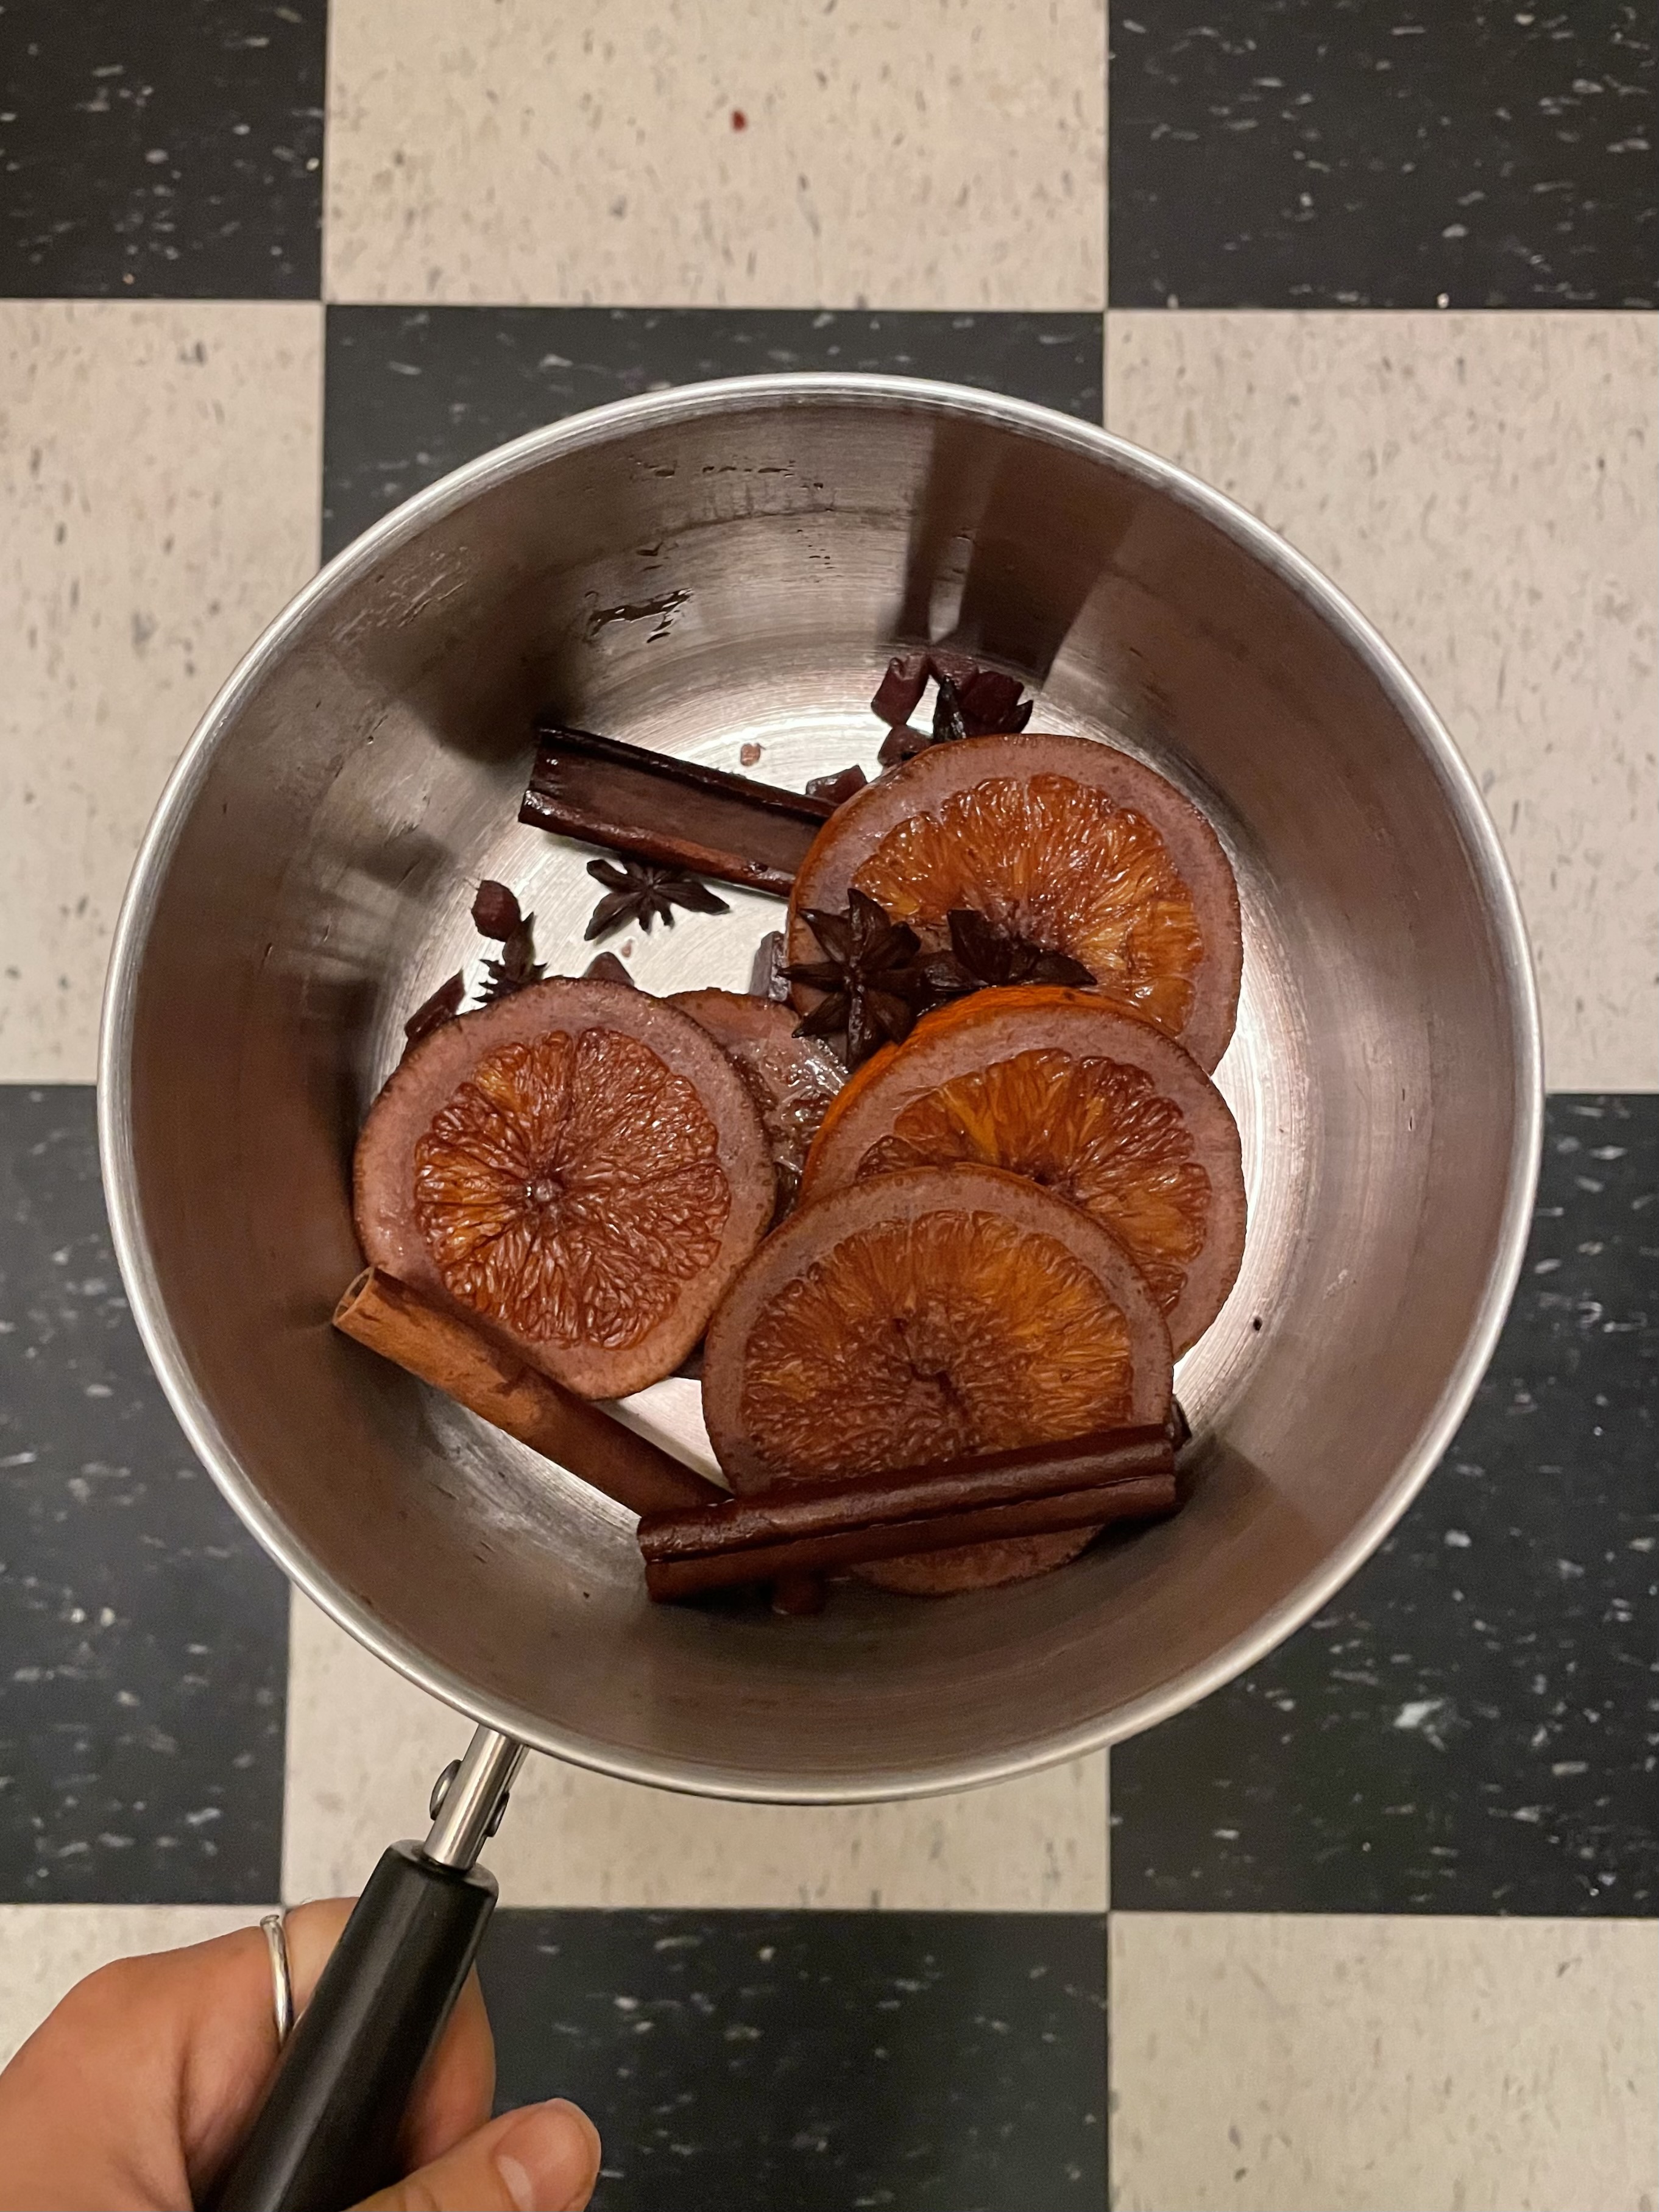 orange slices, star anise, cinnamon sticks, candied ginger, all stained red from wne, in a pot together. the aftermath of mulled wine